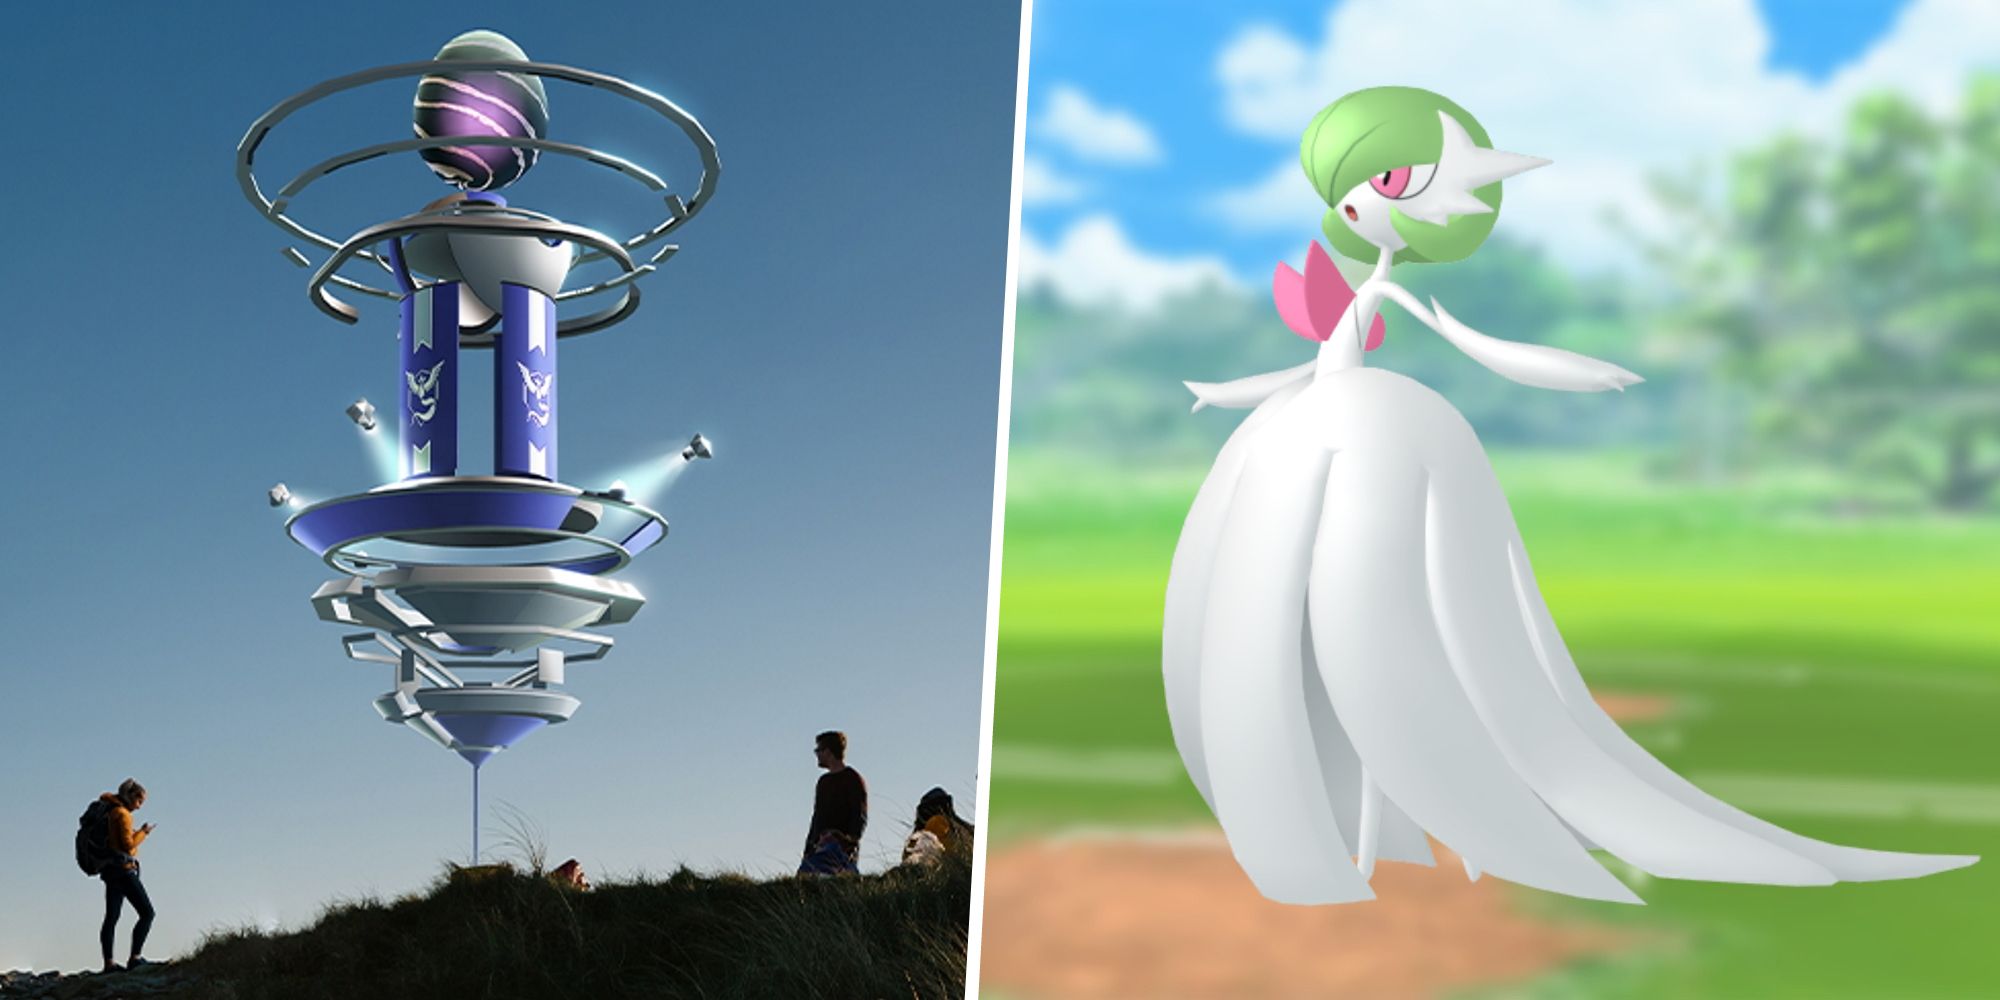 Pokemon GO Mega Gardevoir raid guide: Best counters, weaknesses, and more